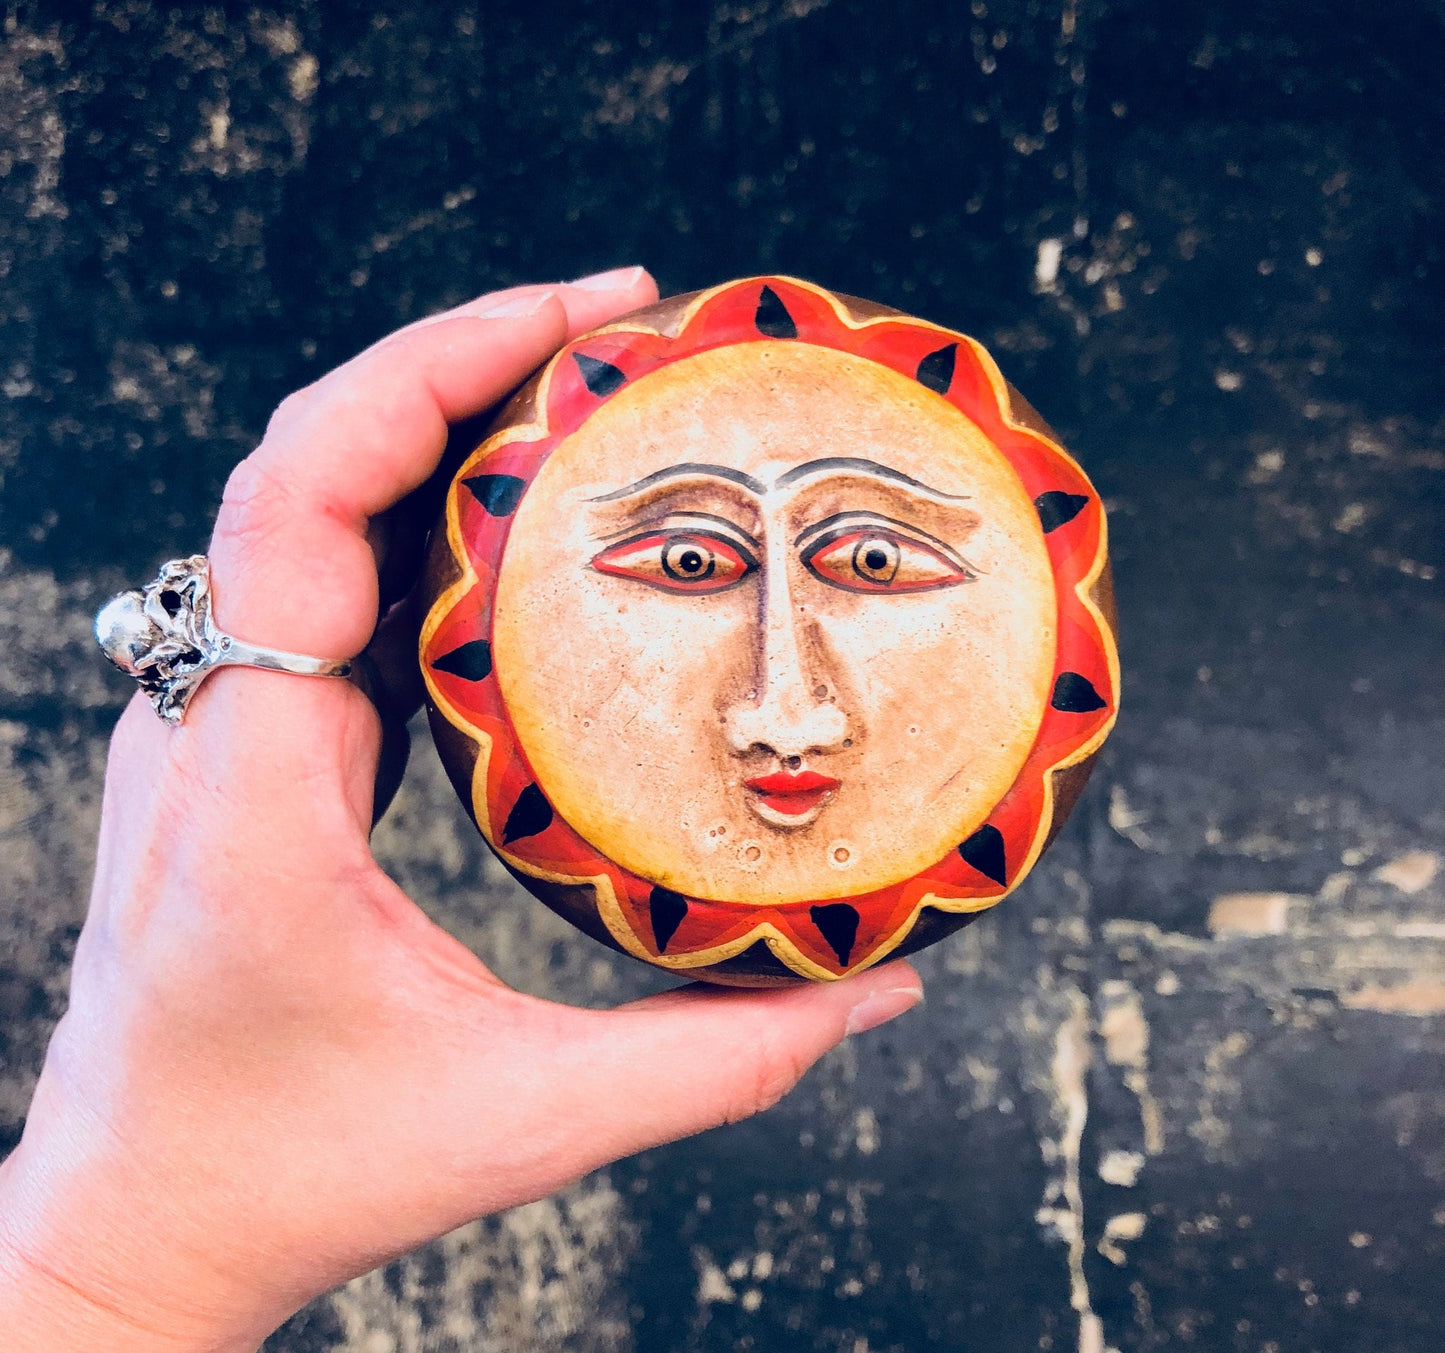 Wooden sun face trinket box held in hand, with red, orange and yellow carved rays surrounding facial features on a textured dark background.